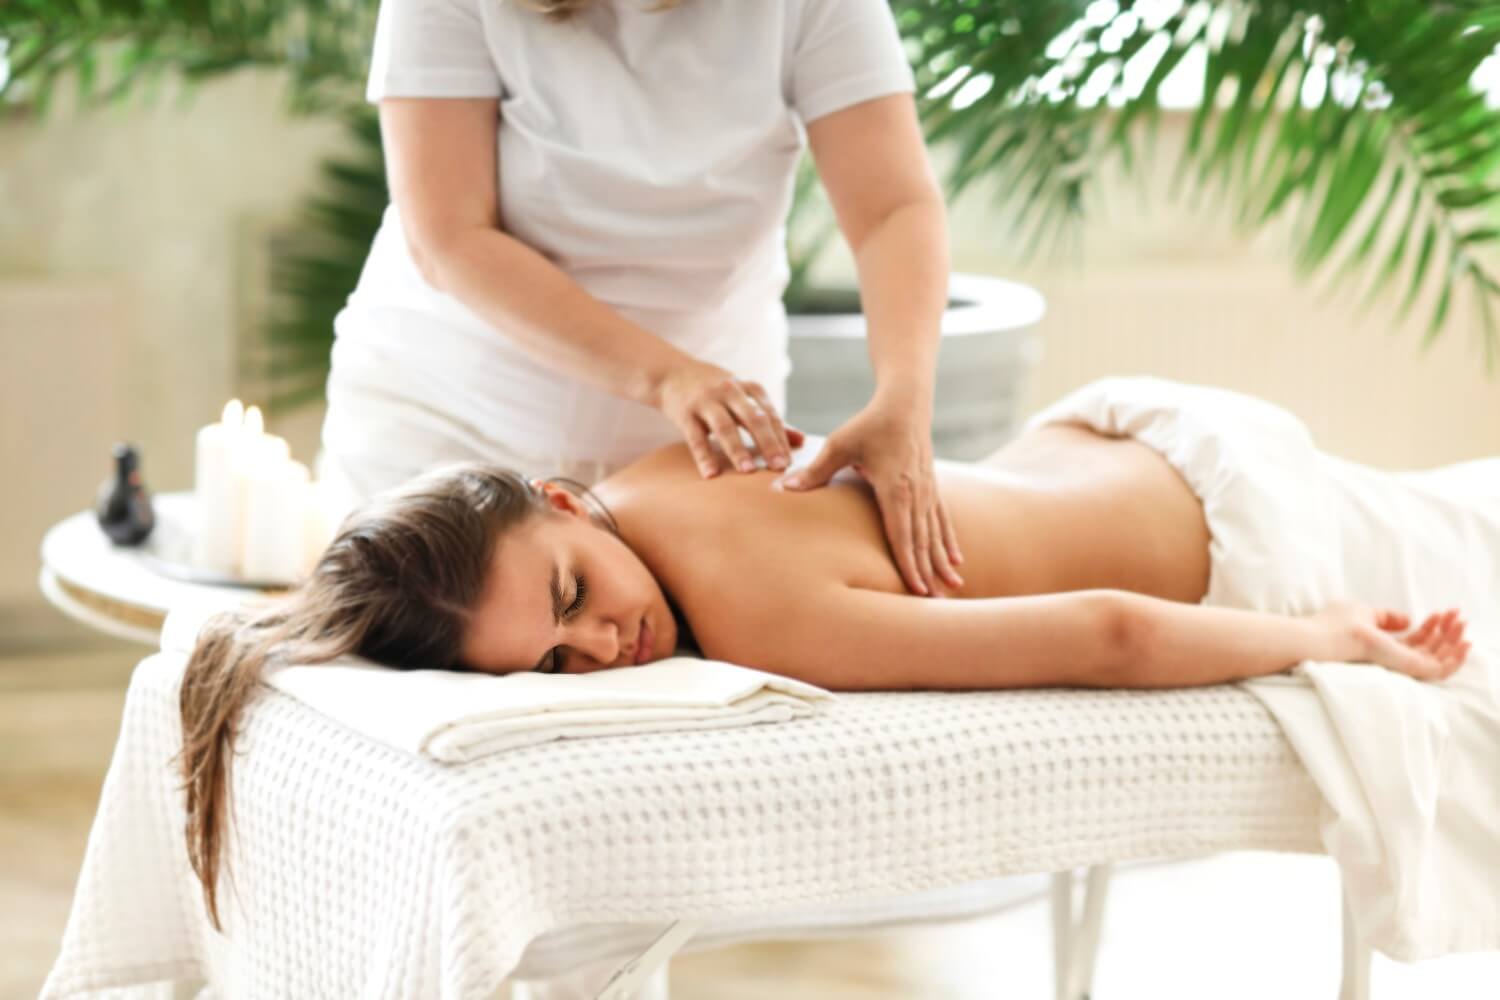 young-woman-resting-during-spa-procedure-woman-spa-relax-salon-session-eyes-closed-lying-client_t20_Joe62P